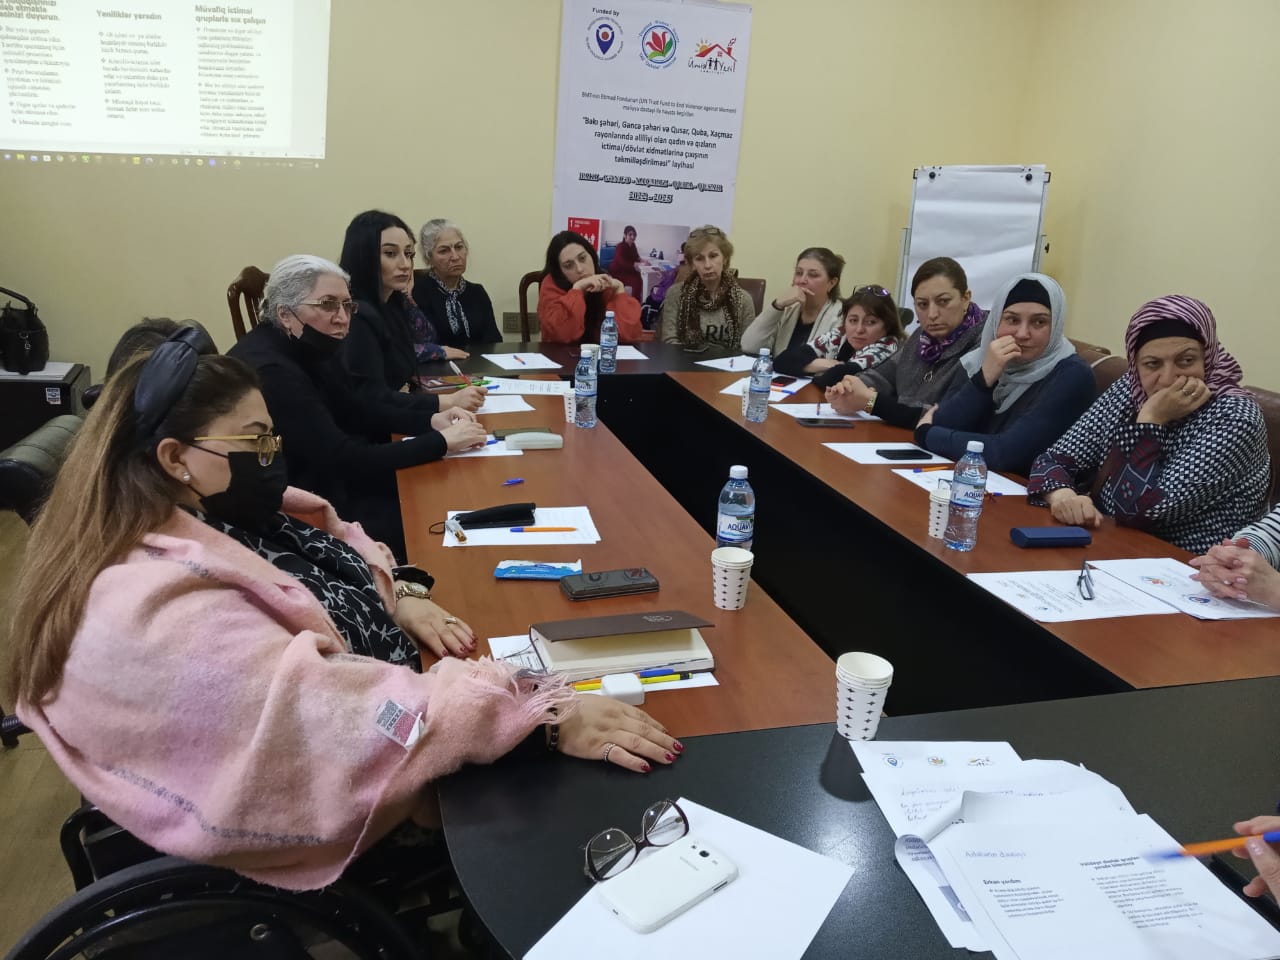 Seminar about inadequate perception issues and violence against women and girls with disabilities and importance of supporting them by their communities was held in Baku 